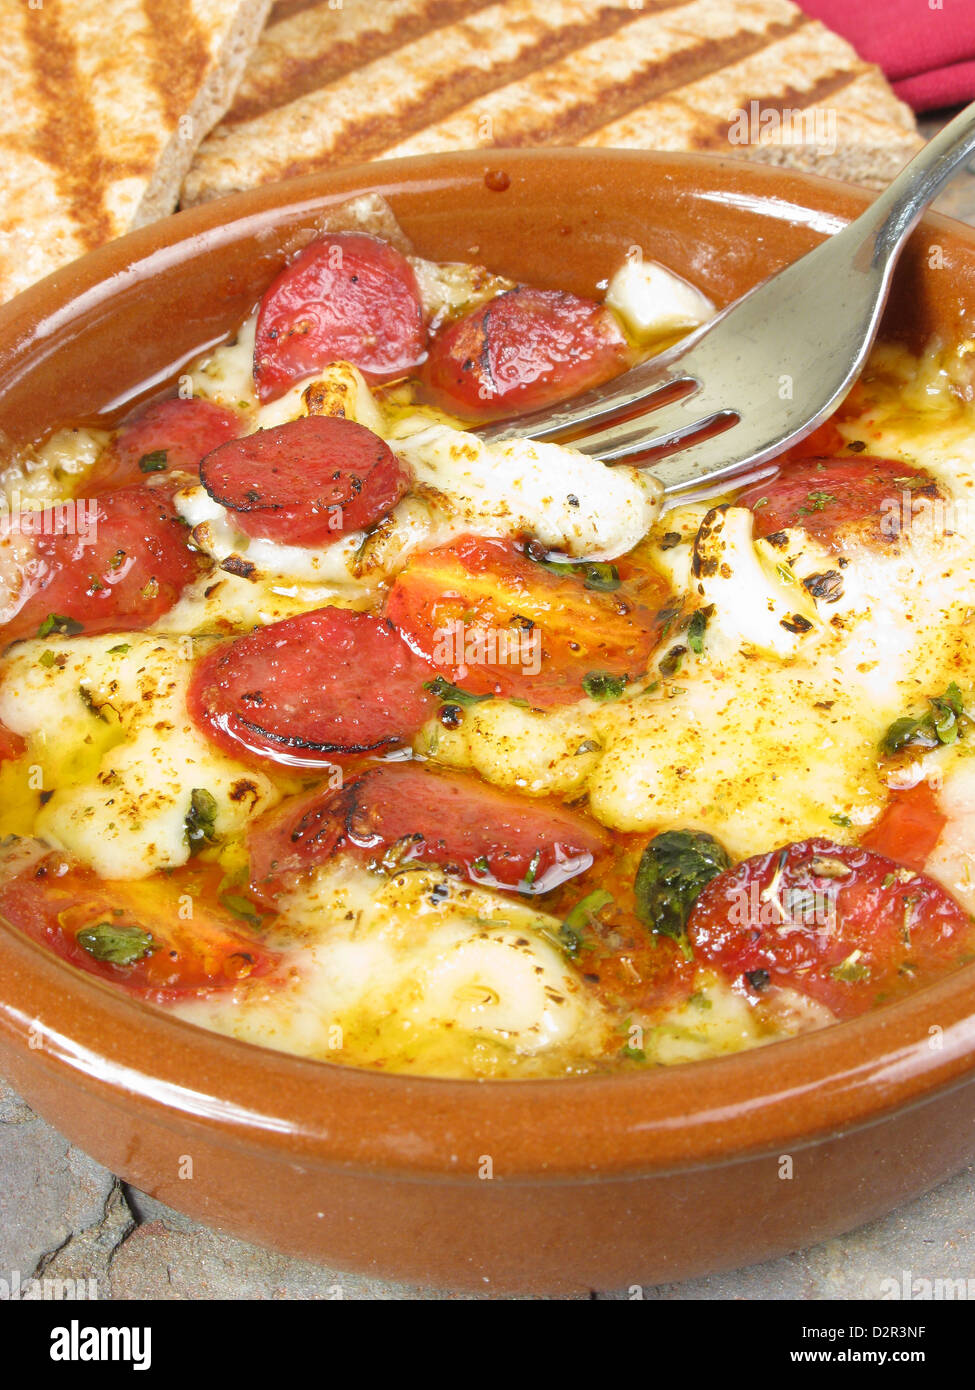 A typical Greek dish of saganaki (baked cheese) with loukanika (spicy ...